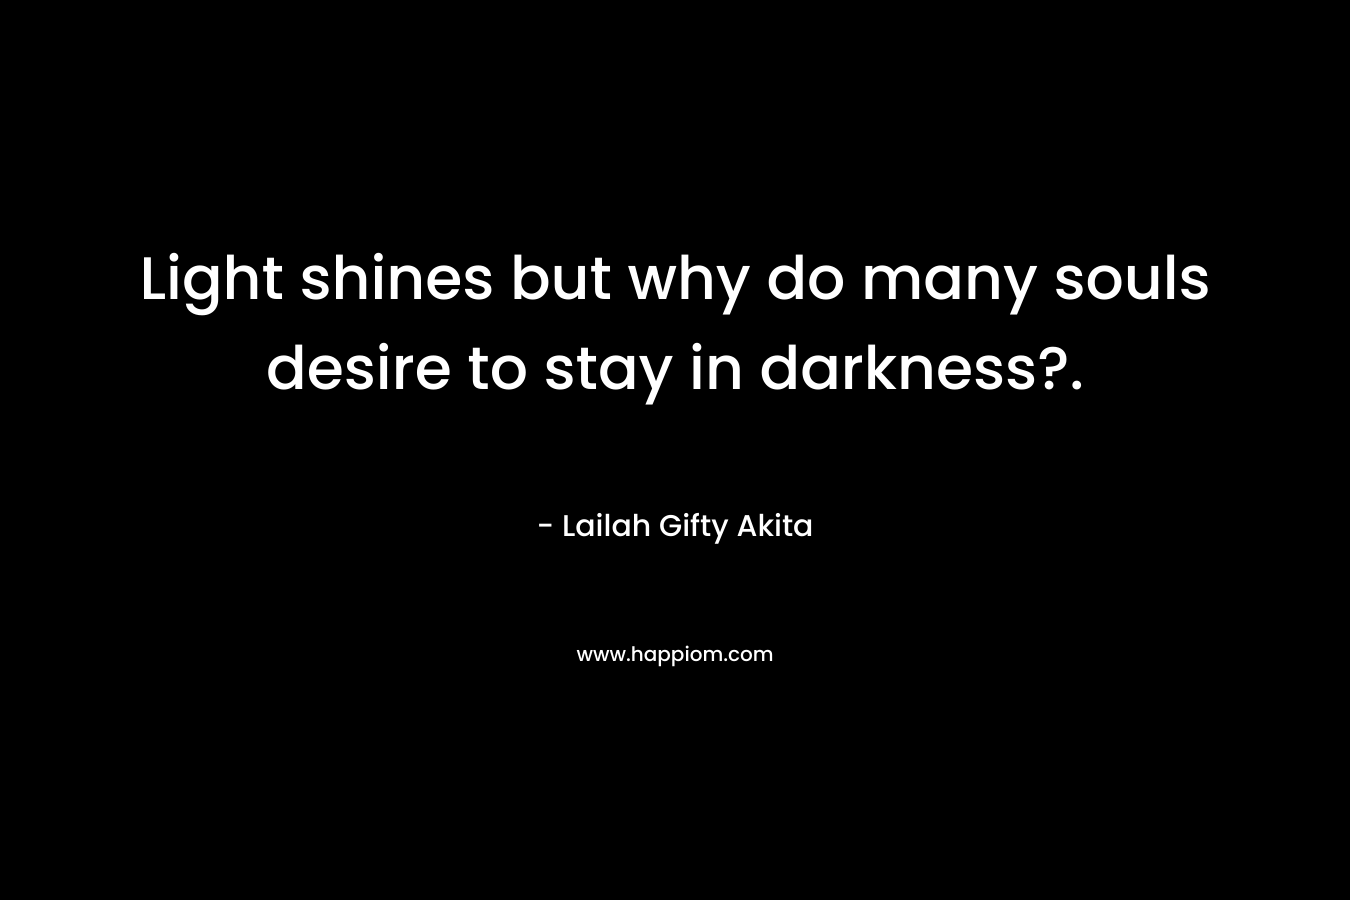 Light shines but why do many souls desire to stay in darkness?.